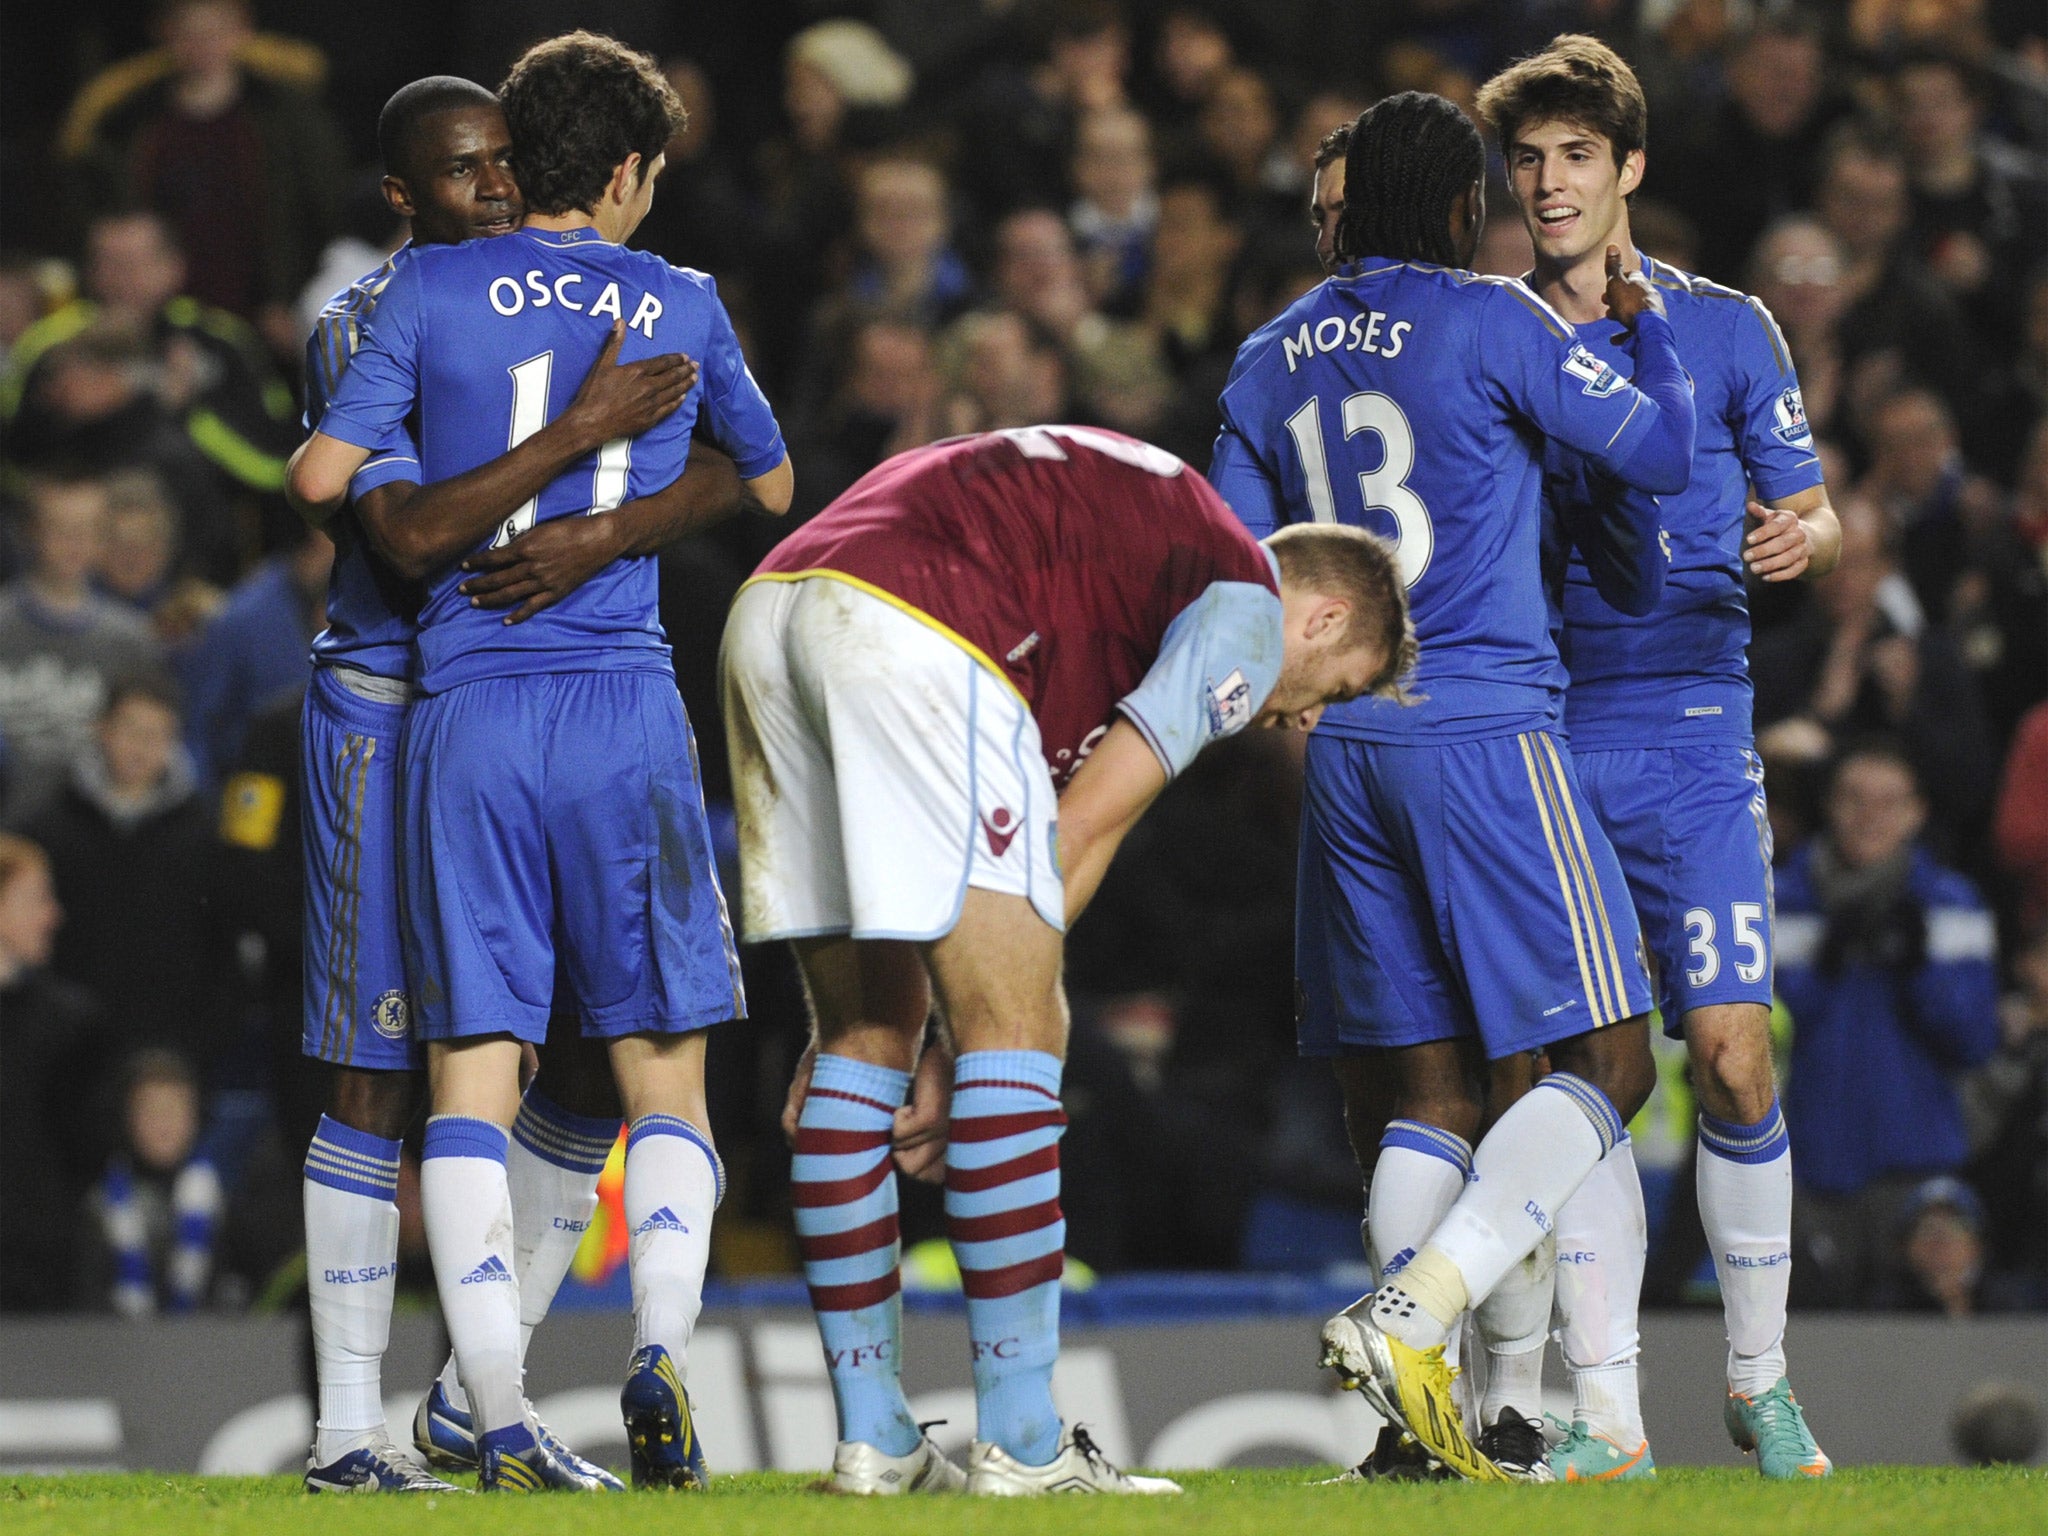 Villa’s eight-goal defeat by Chelsea left them three points off 18th place